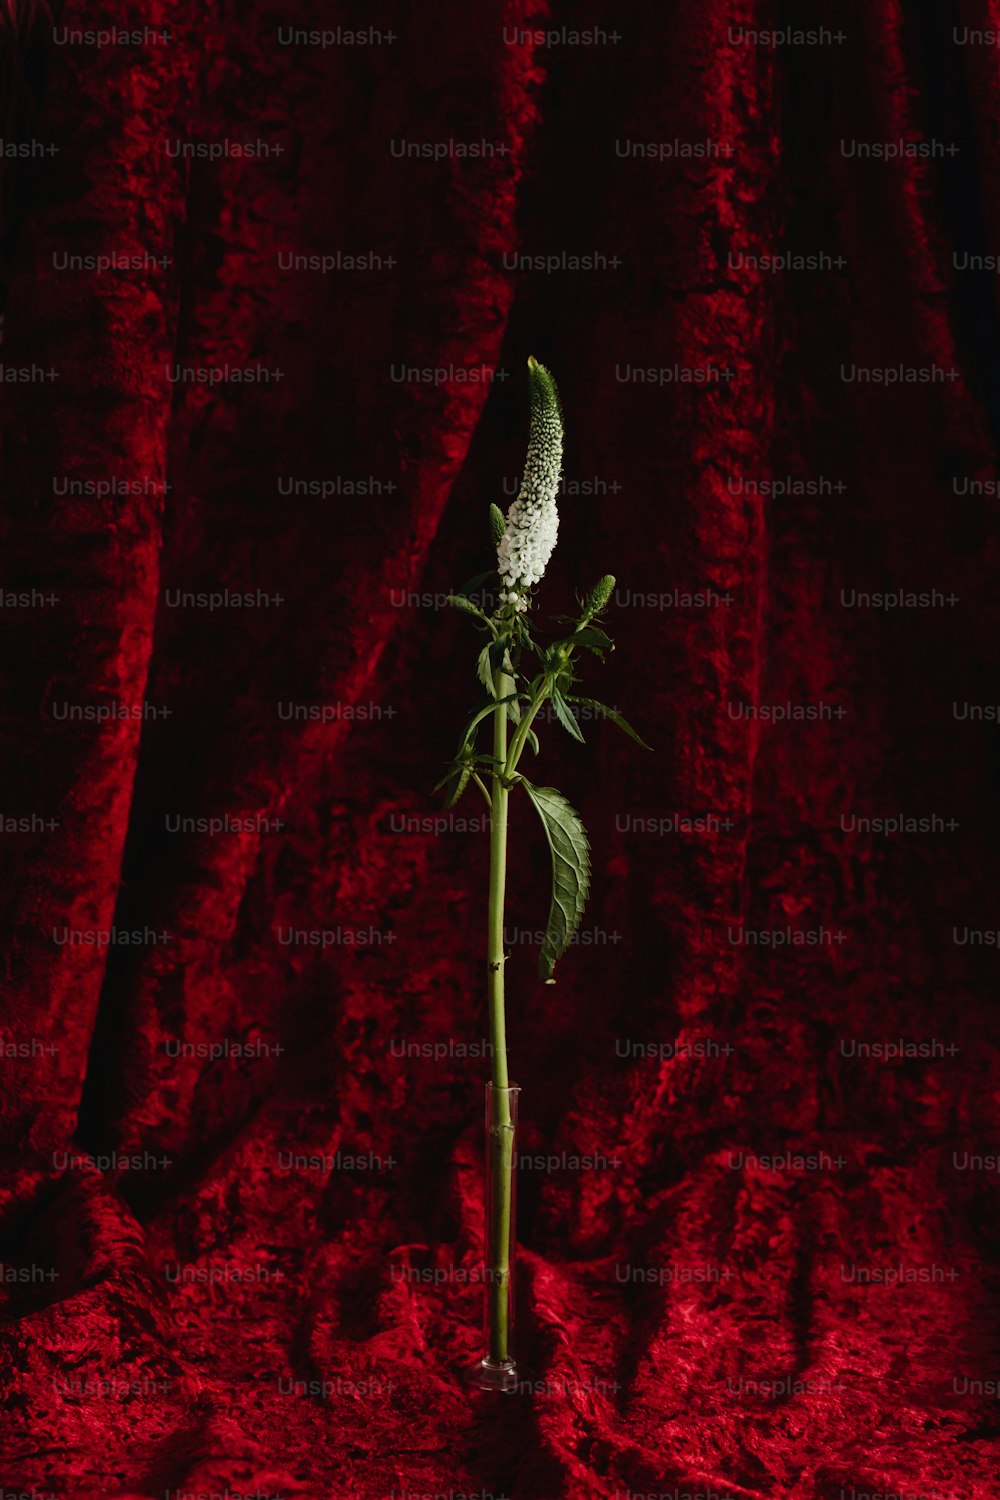 a single white flower in a vase on a red cloth